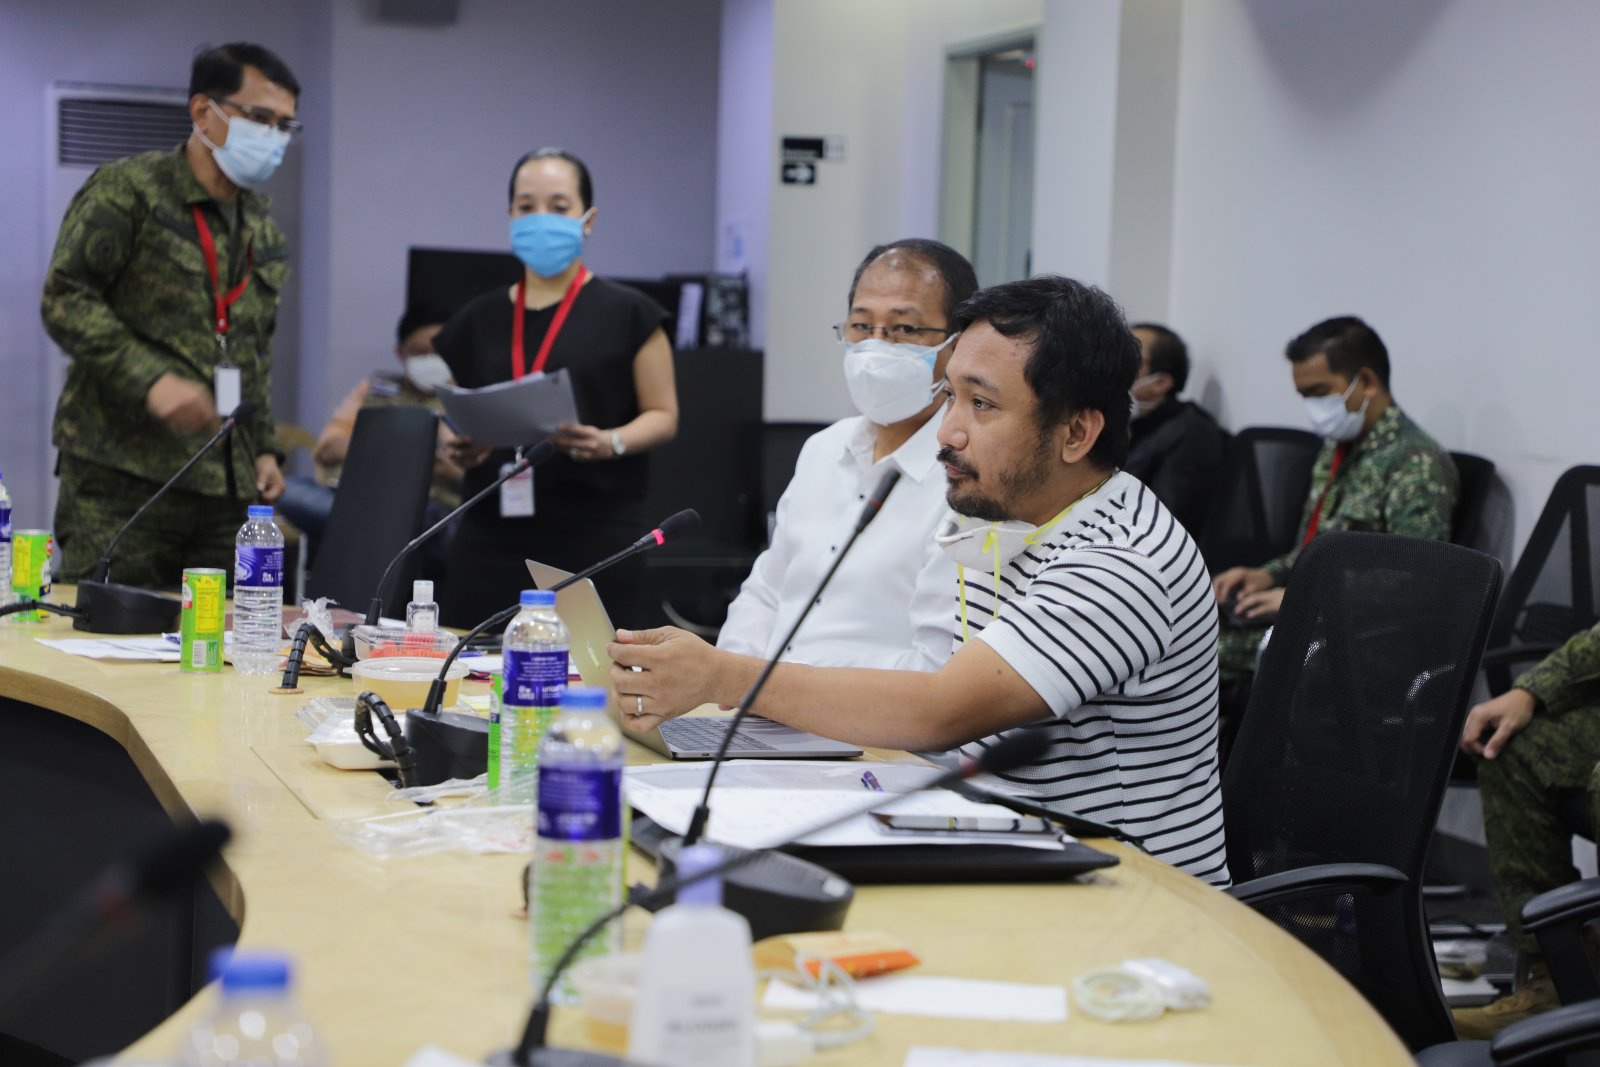 National Task Force against COVID-19, systems developer team up to fight  pandemic - PeaceGovPH